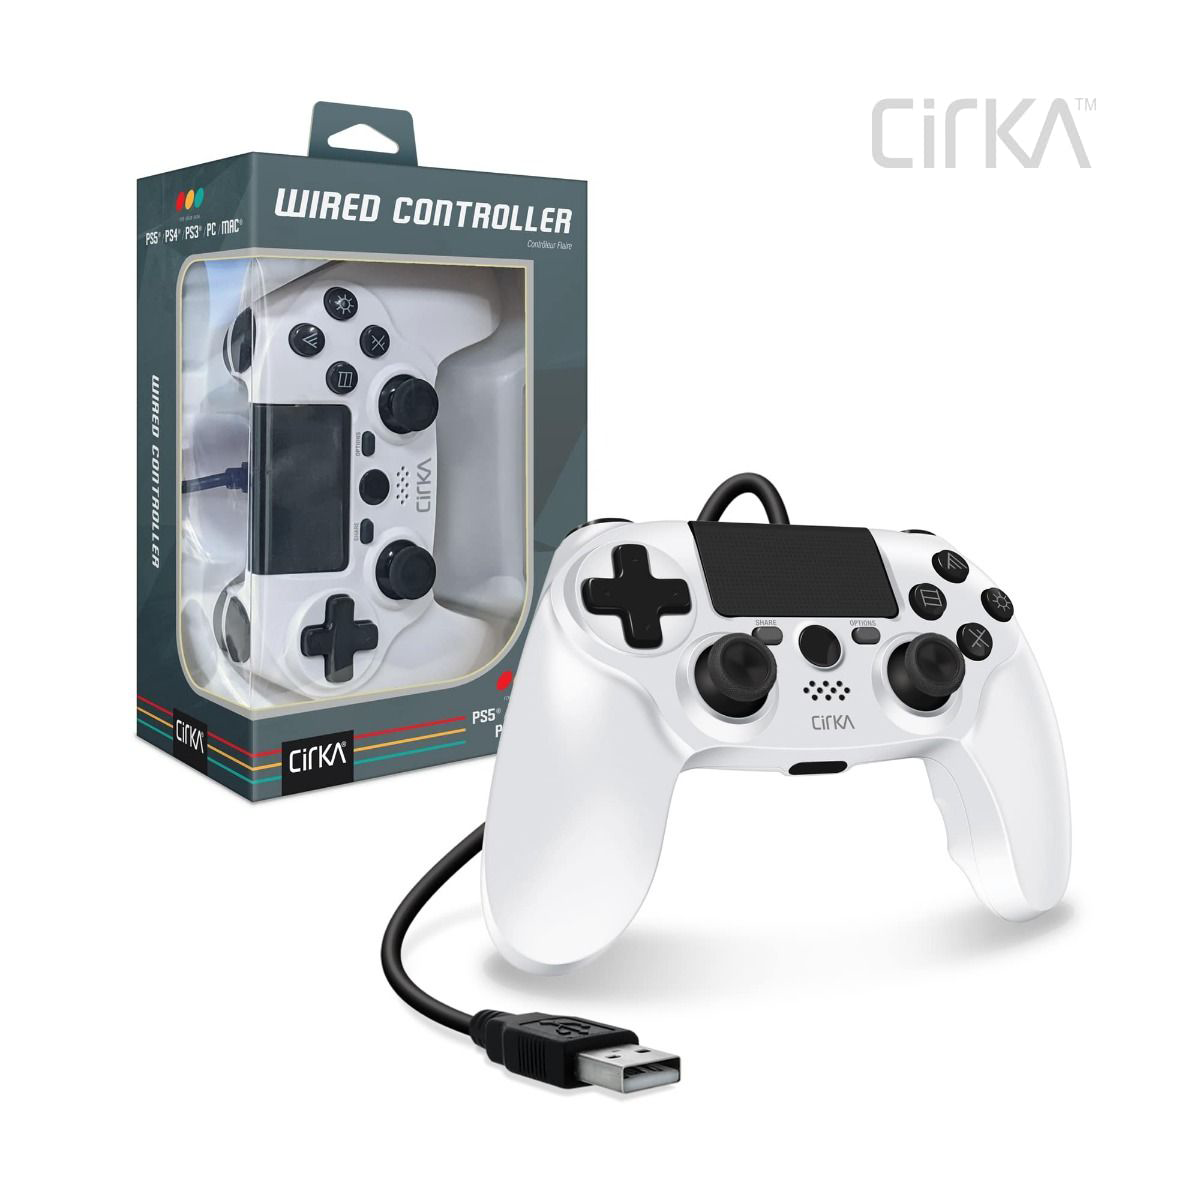 Wired Game Controller For: PS4® / PC / Mac®